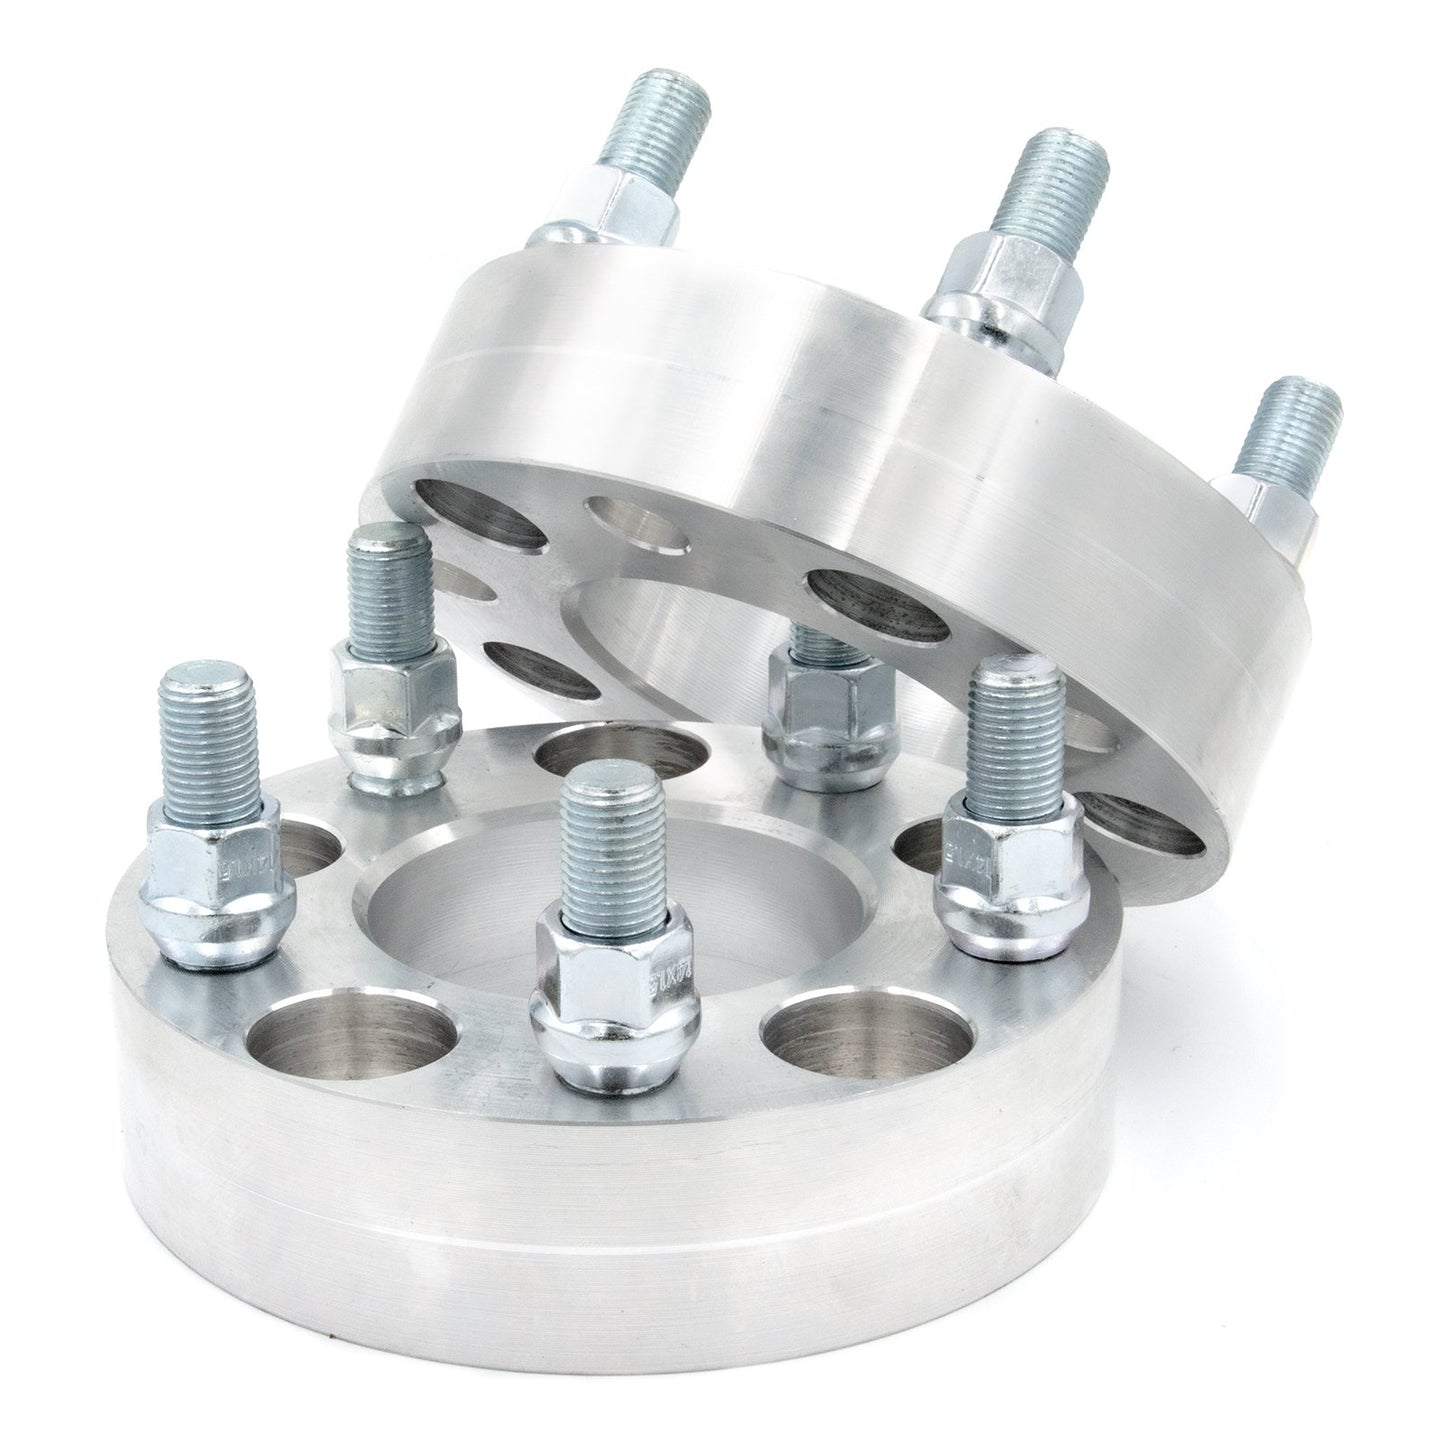 5x5.5" to 5x4.5" Wheel Spacer/Adapter - Thickness: 3/4"- 4"